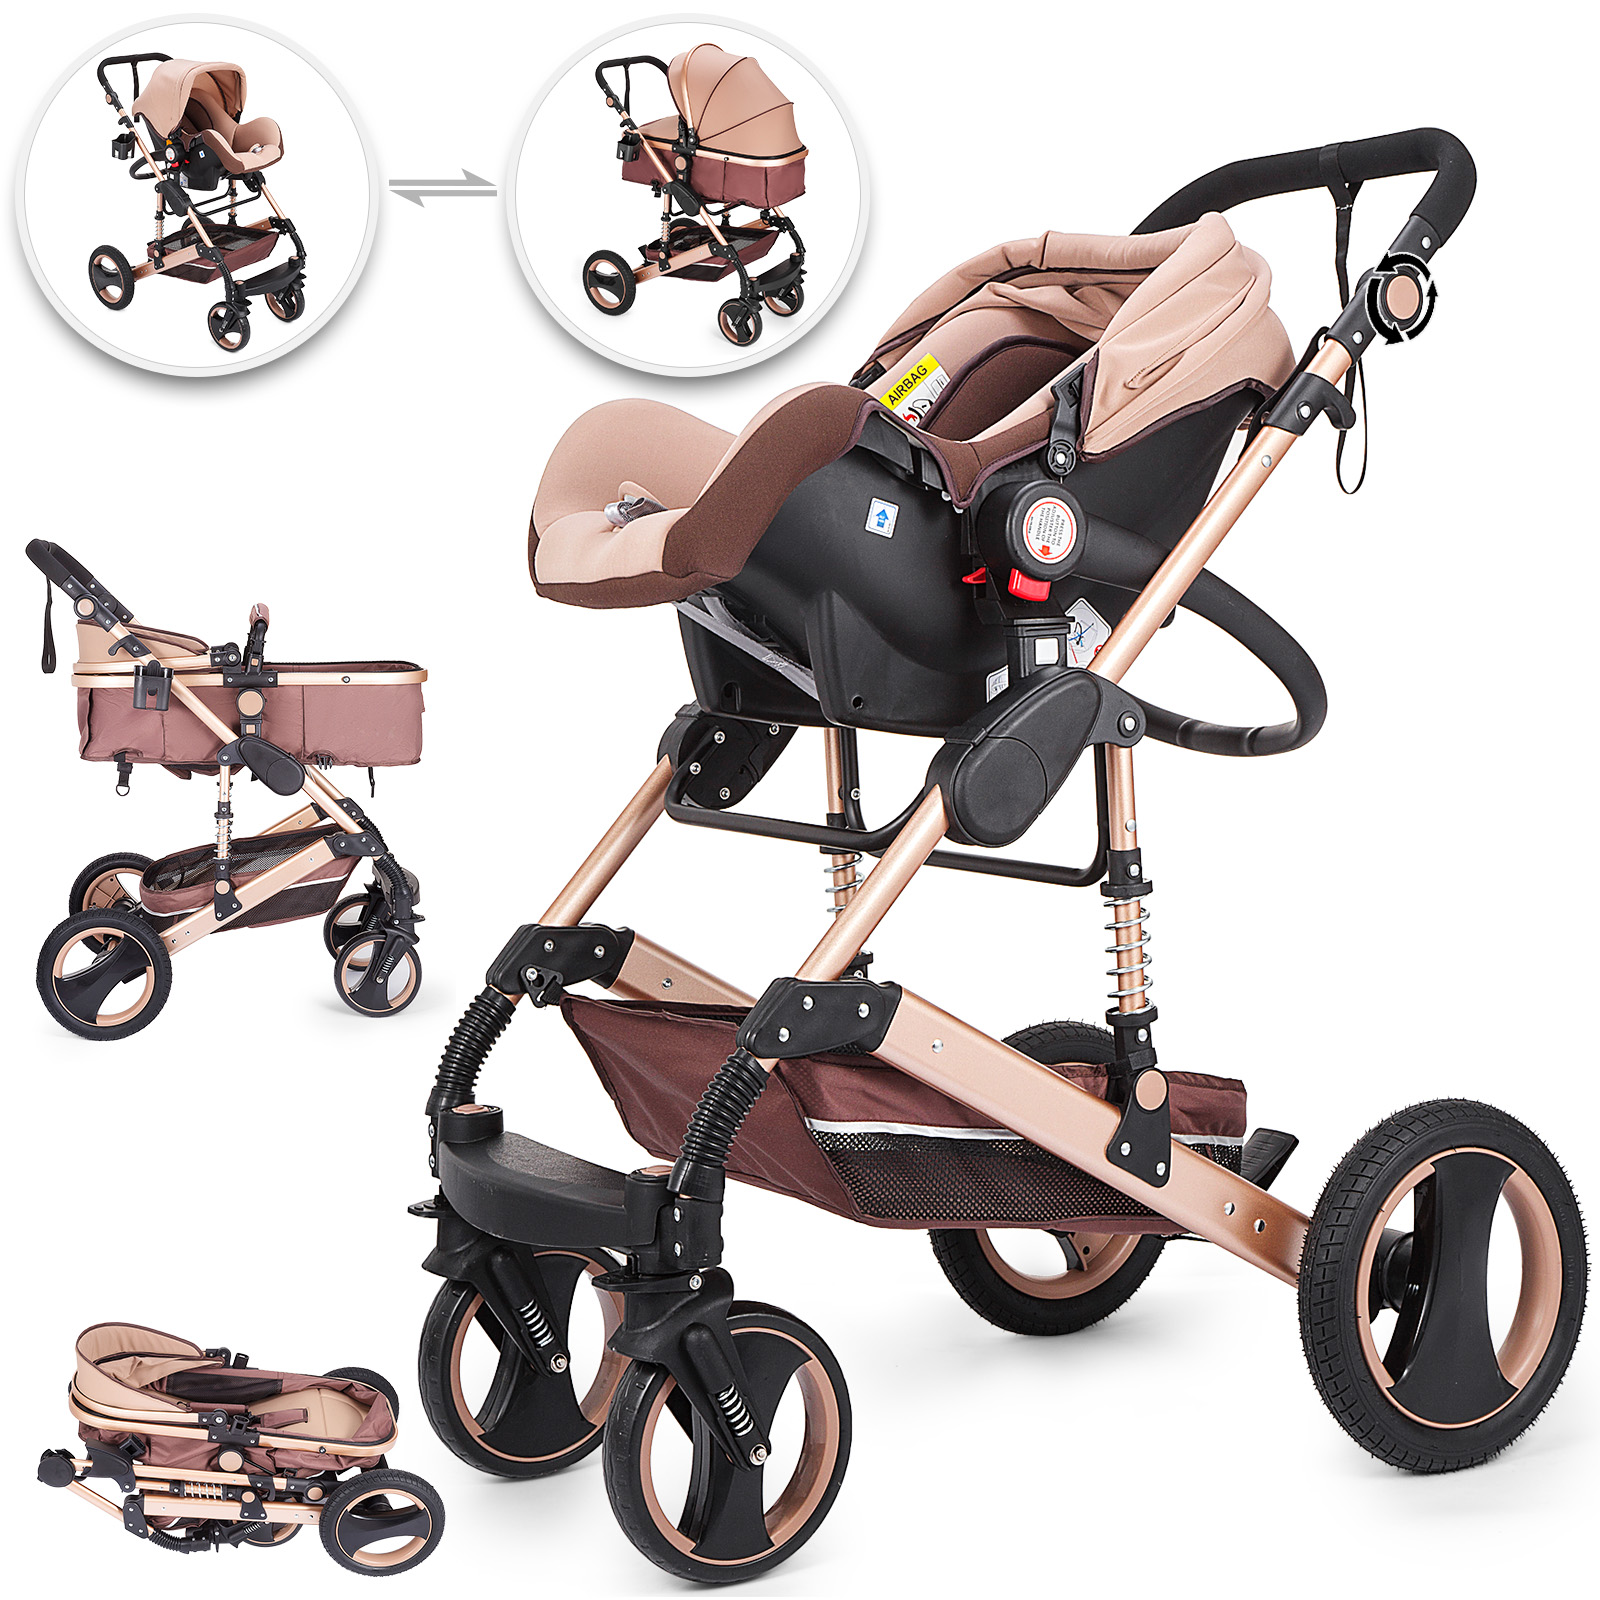 buggy stroller for baby